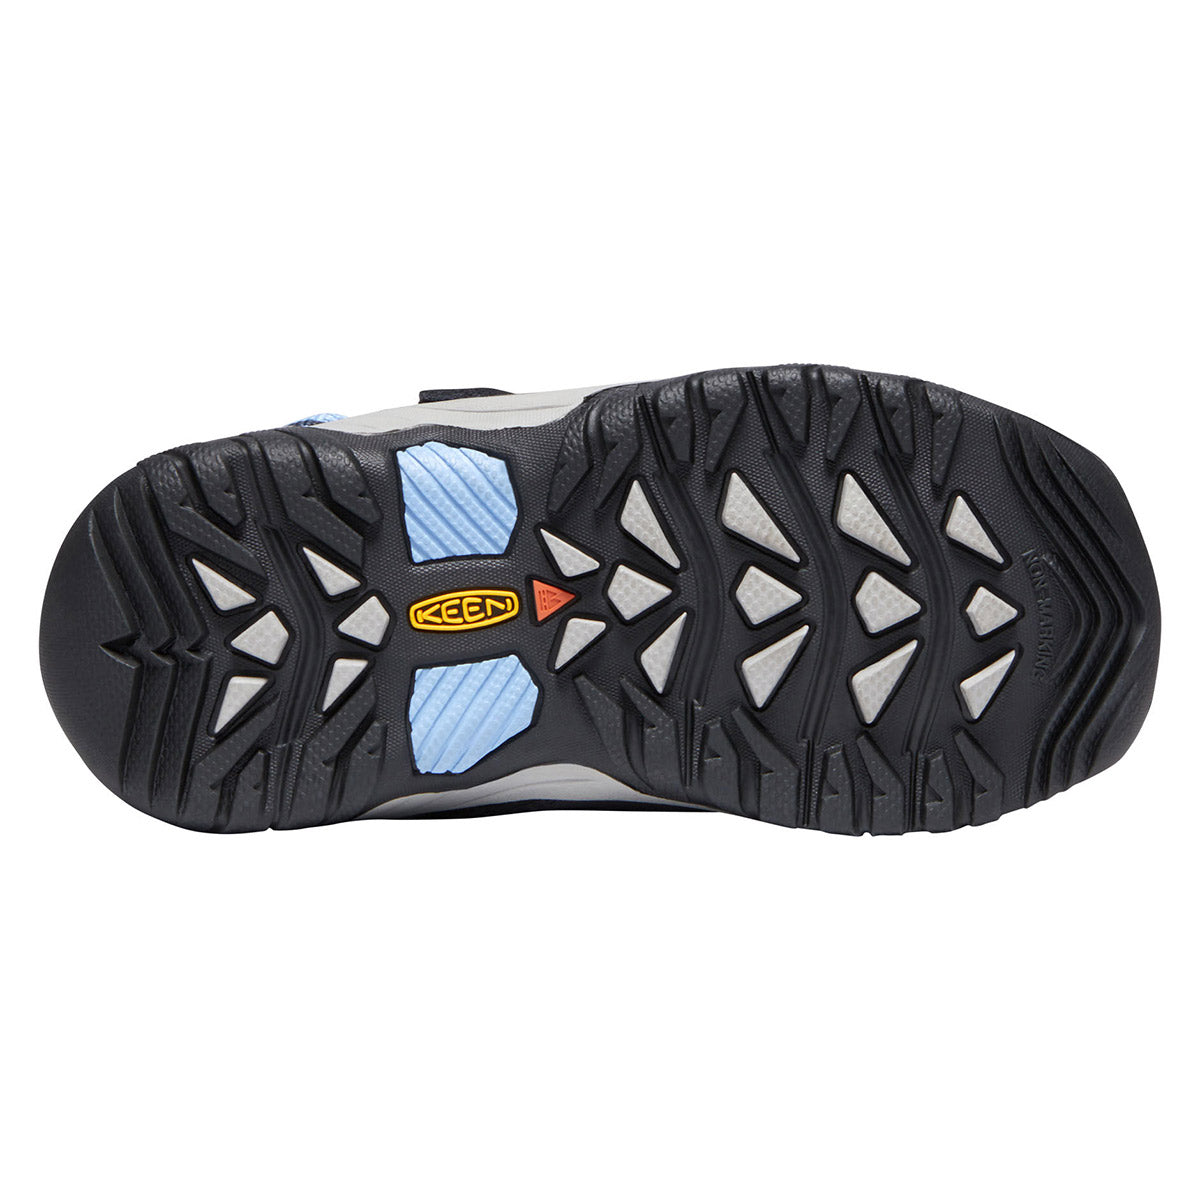 Tread pattern of a Keen Targhee Low Waterproof Della Blue kid&#39;s shoe sole with black, gray, and blue accents.